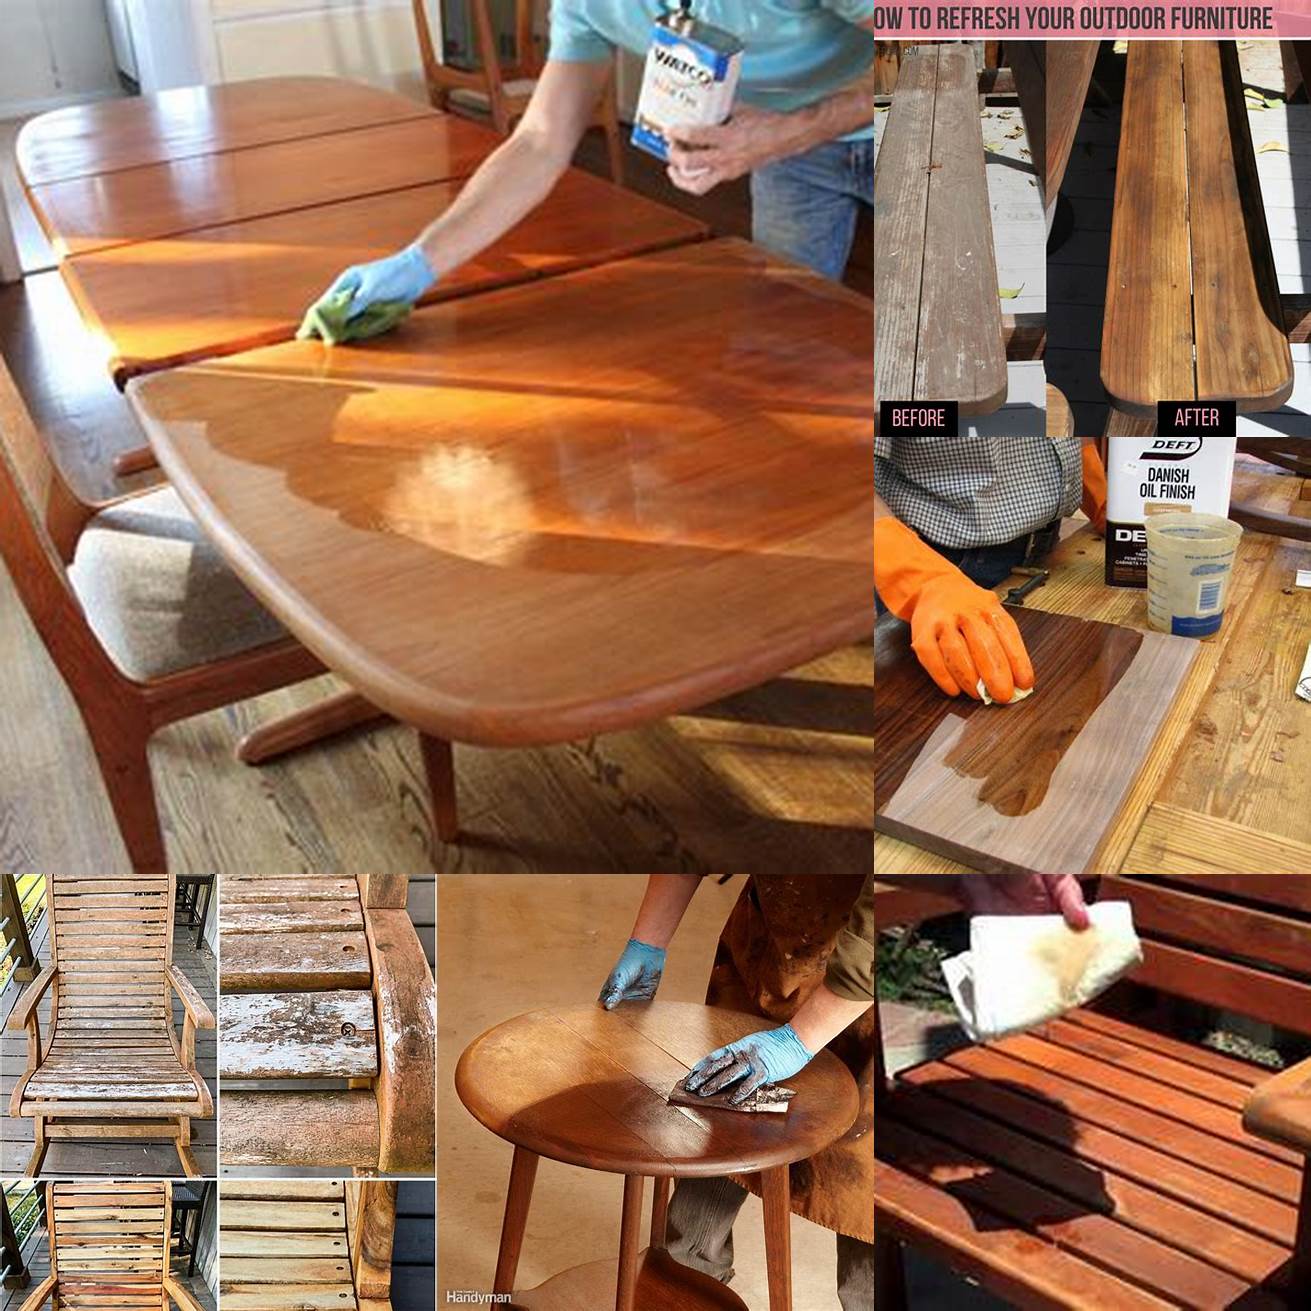 Use teak oil or stain to refinish